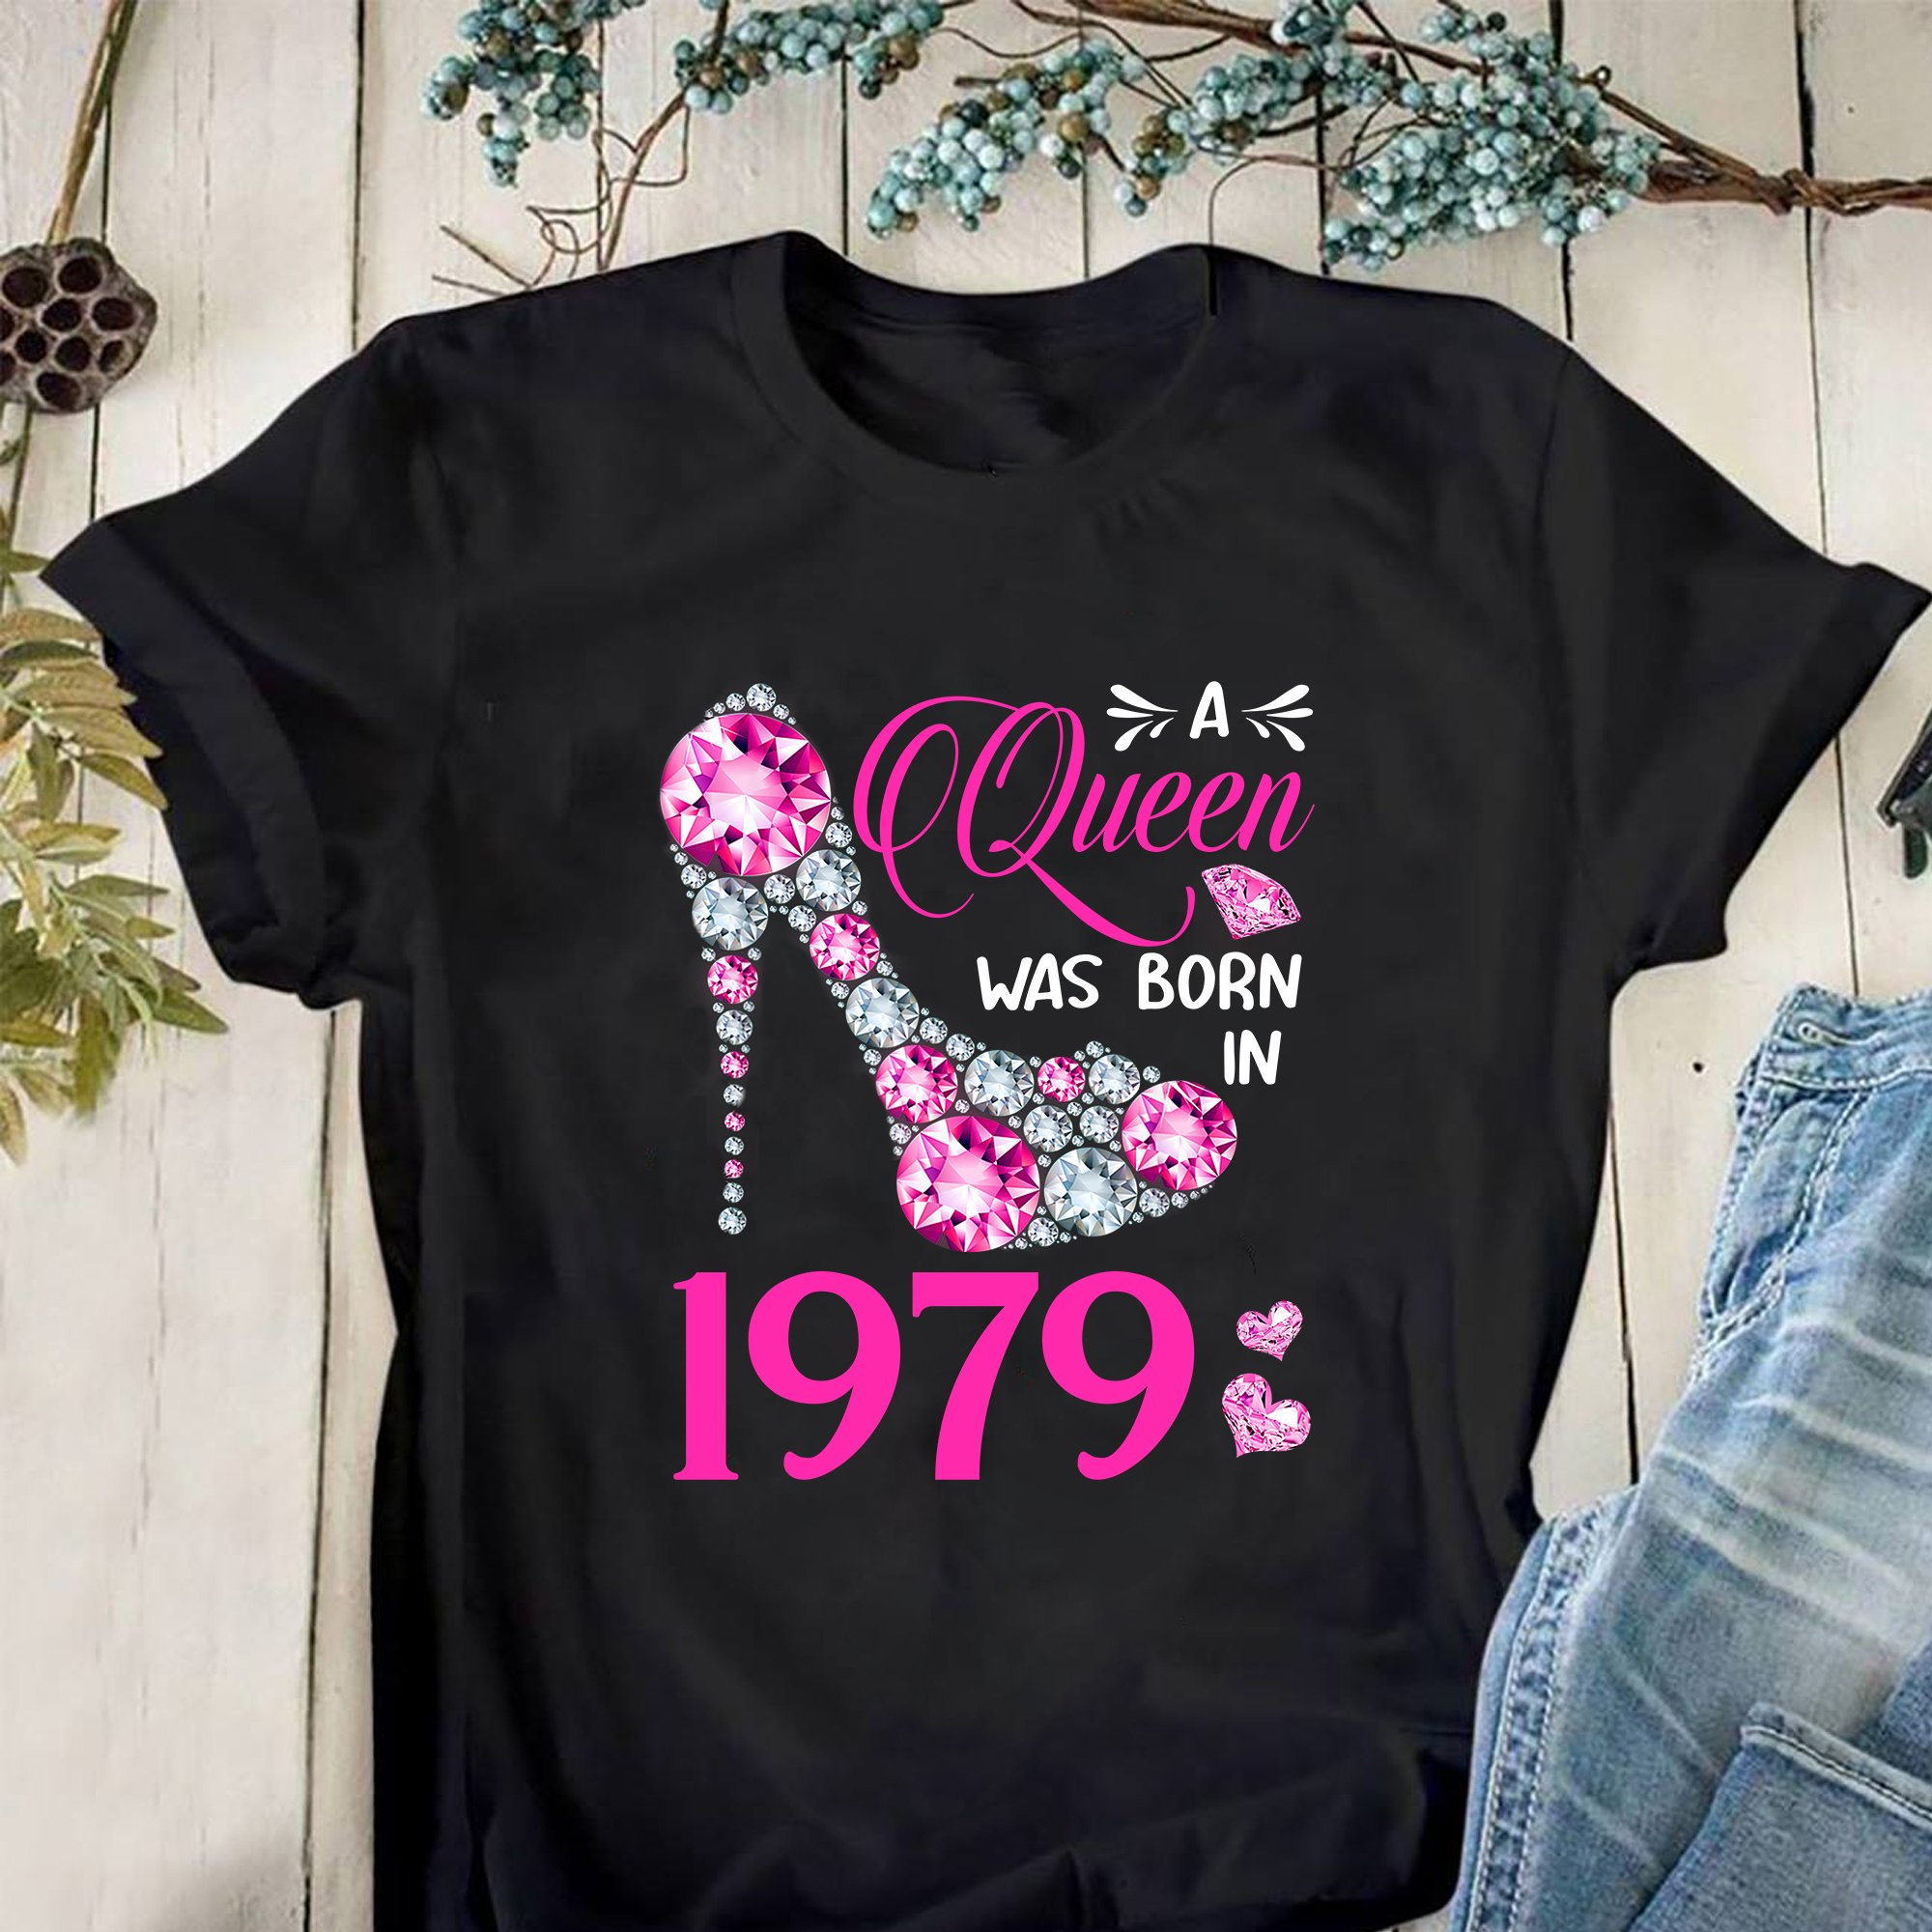 A Queen Was Born In 1979, Birthday Gifts Idea, Gift For Her Unisex T-Shirt KM0704